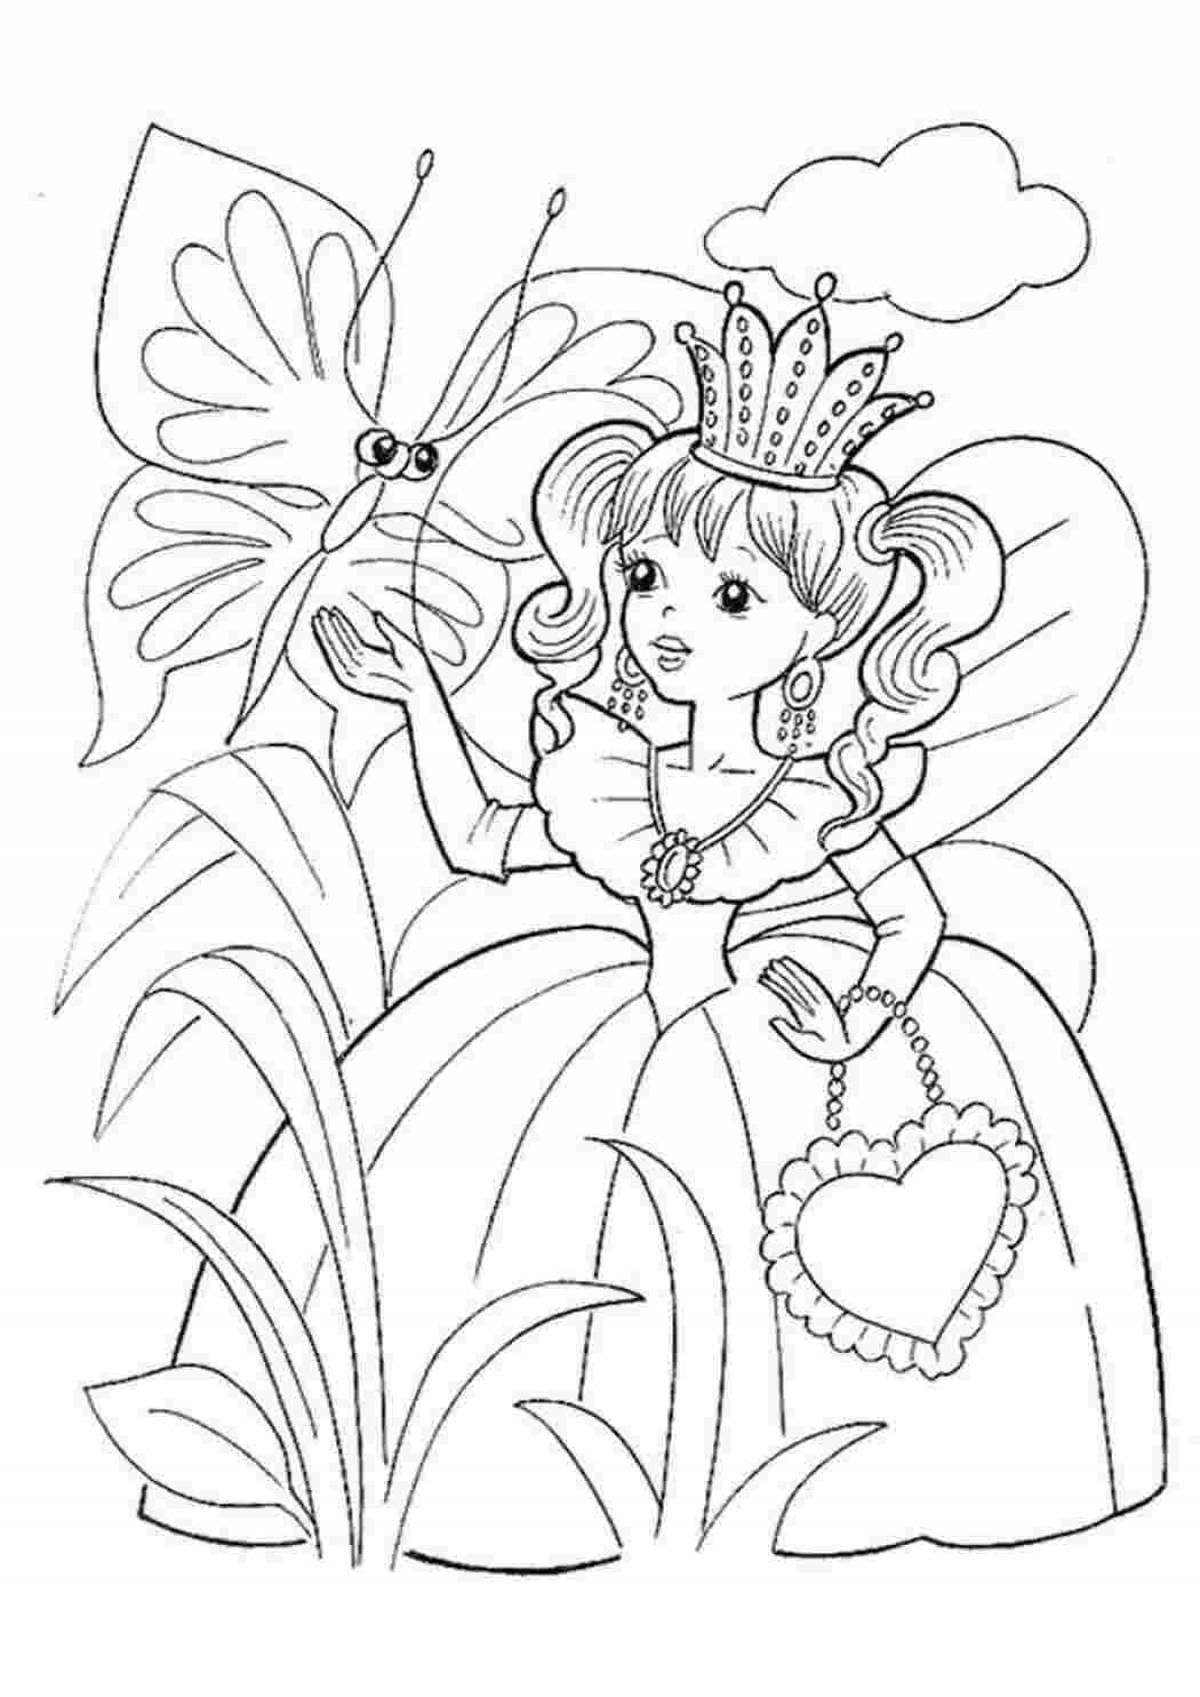 Coloring pages for children 6 years old: how to choose and print for free